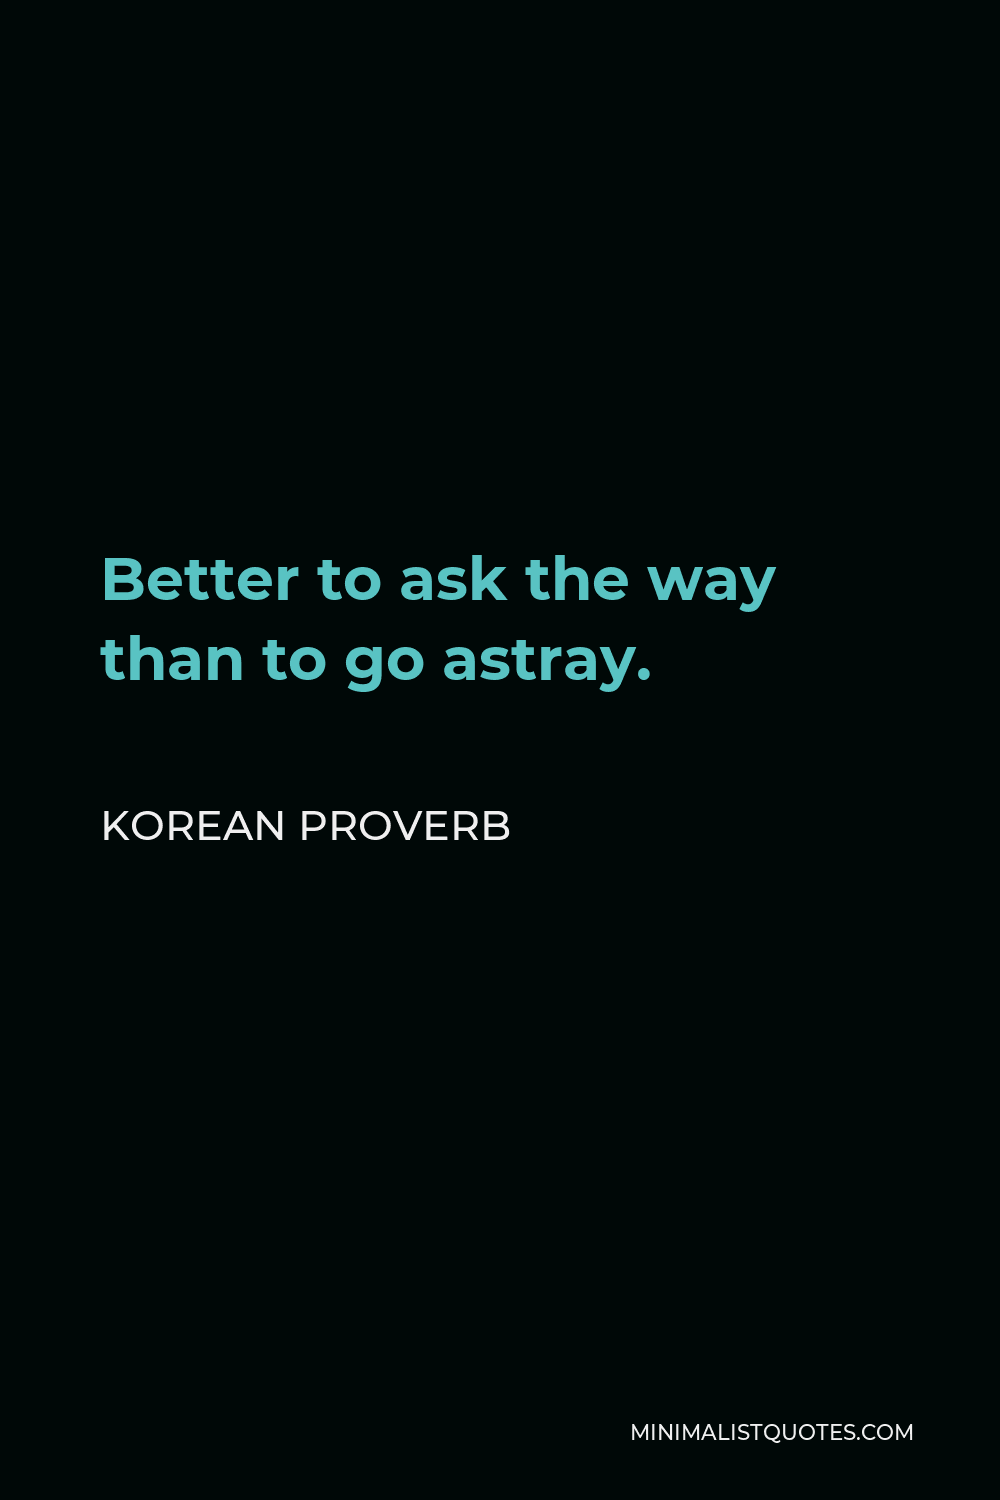 Korean Proverb Quote - Better to ask the way than to go astray.